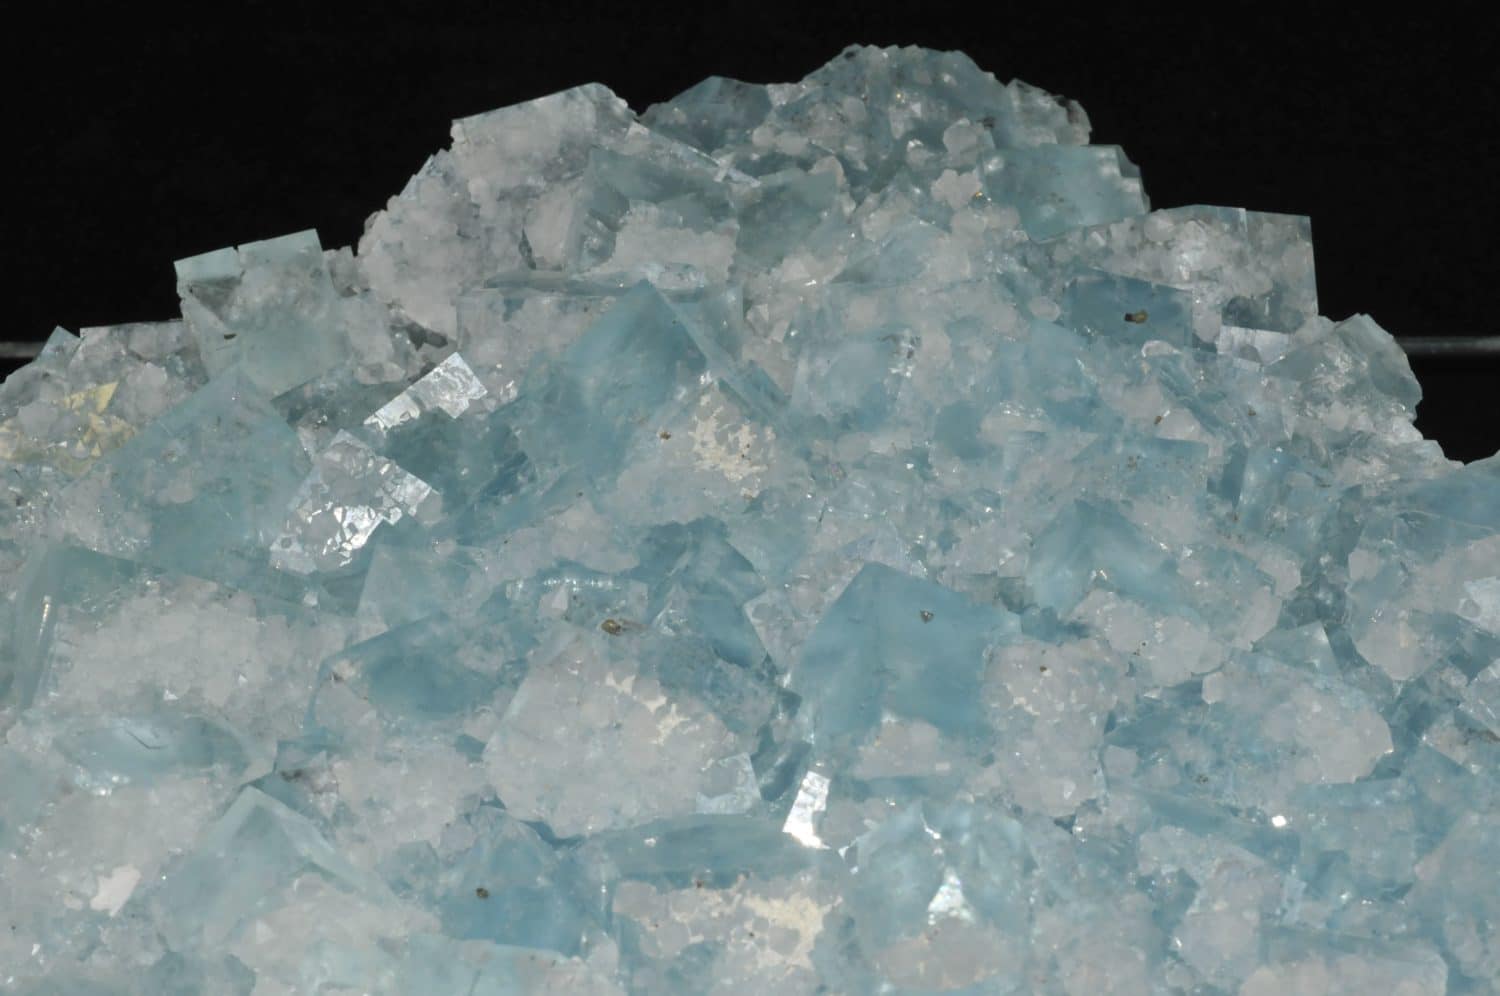 Blue fluorite from the Burc mine (at the Burg, Tarn, France)